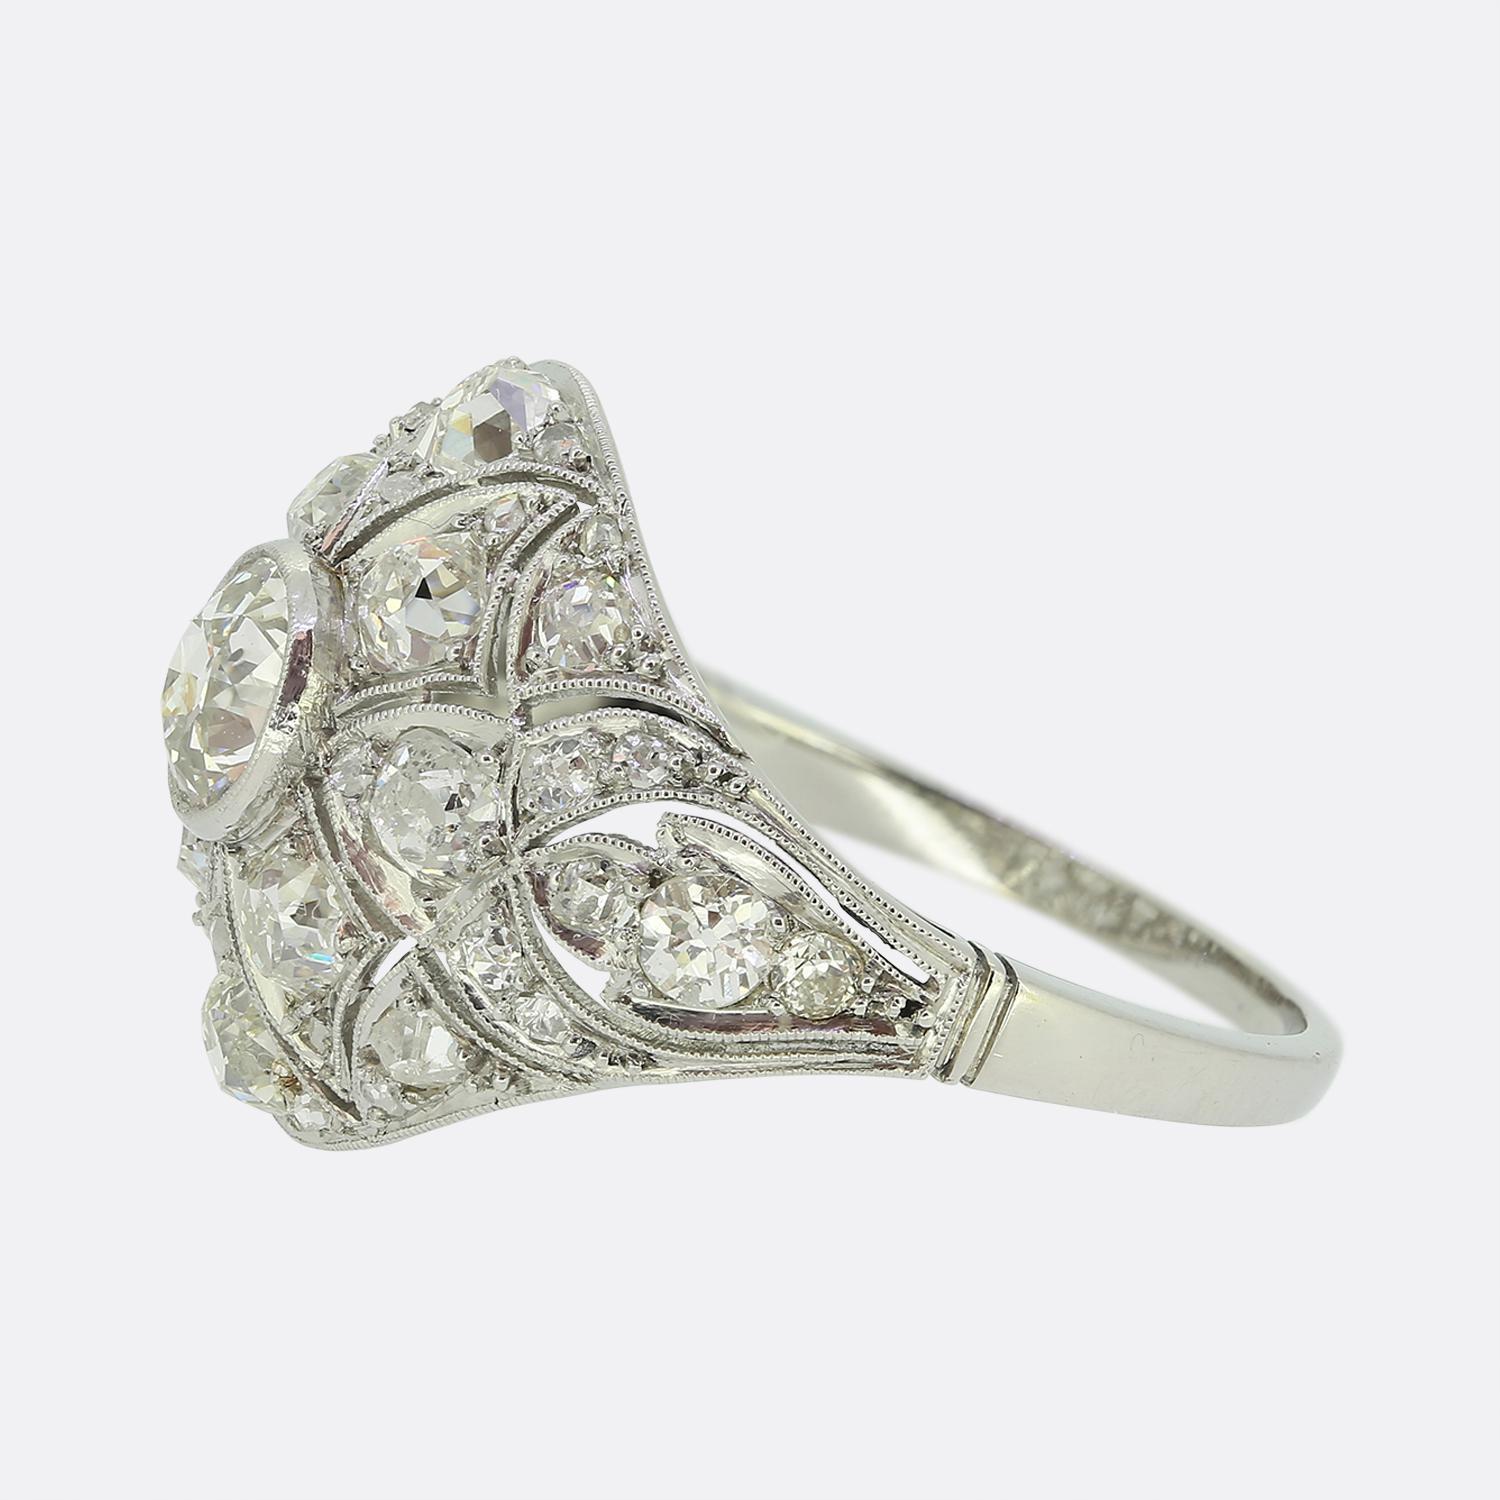 Here we have a stunning diamond bombe ring crafted during the pinnacle of the Art Deco movement. At the centre of the face we find a single round faceted old mine cut diamond. This principal stone sits alone and proud in a fine milgrain setting atop